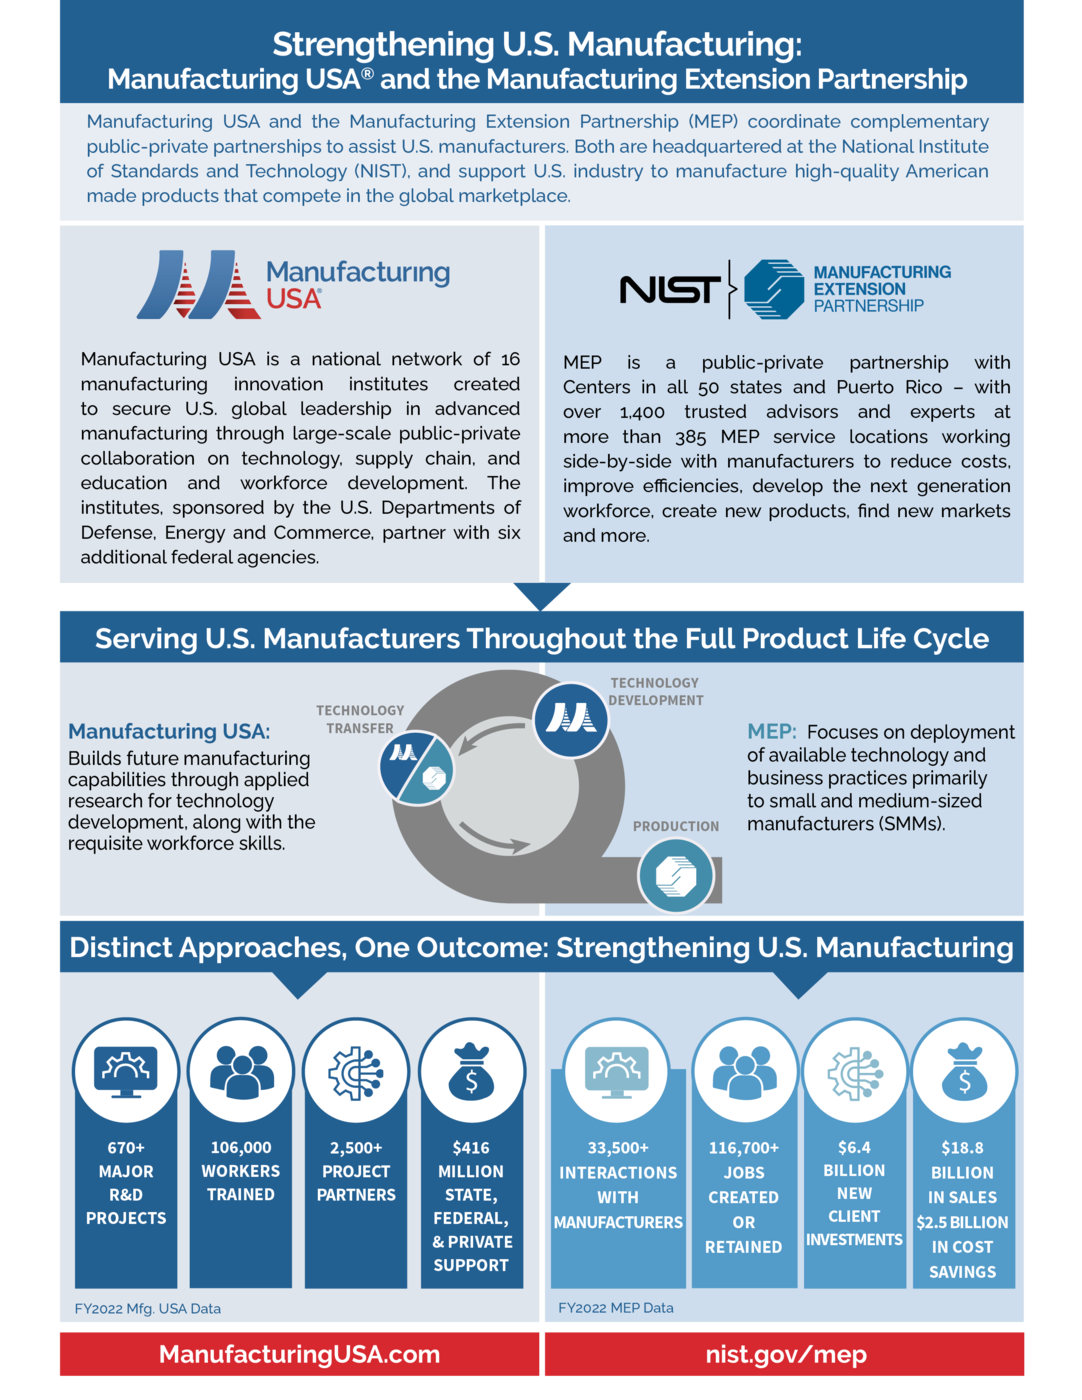 Strengthening U.S. Manufacturing: Manufacturing USA® and the Manufacturing Extension Partnership